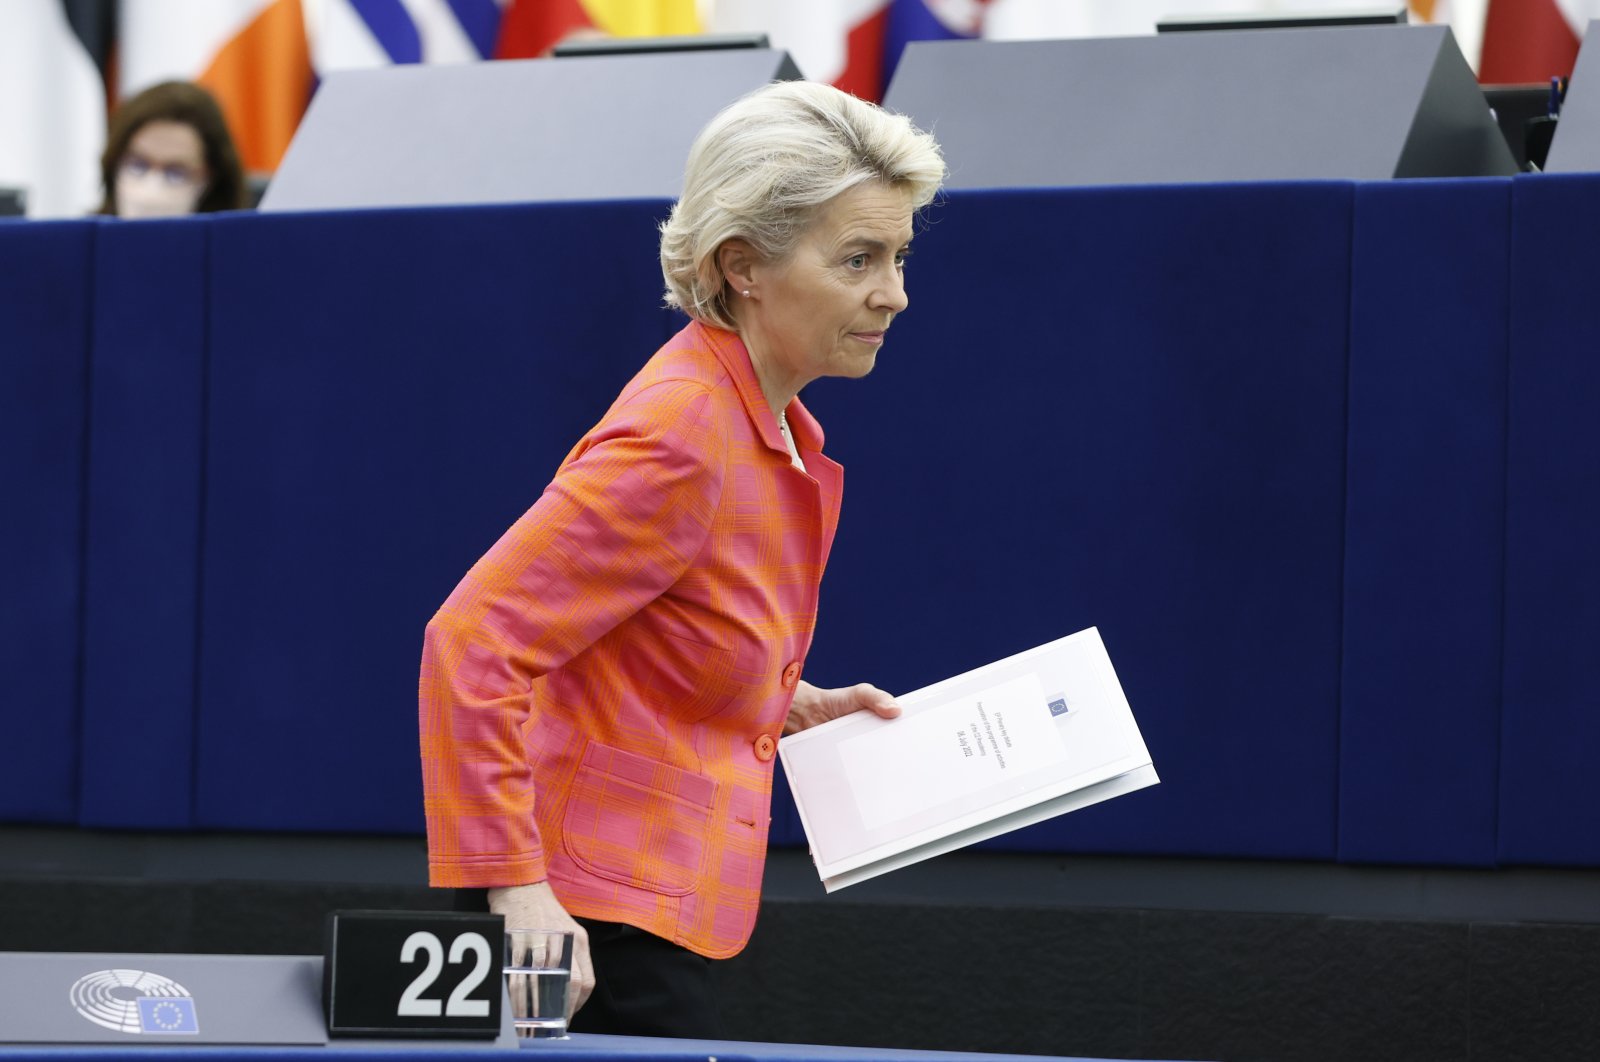 European Commission President Ursula von der Leyen leaves after delivering her speech at the European Parliament during the presentation of the program of activities of the Czech Republic&#039;s EU presidency, in Strasbourg, eastern France, July 6, 2022. (AP Photo)